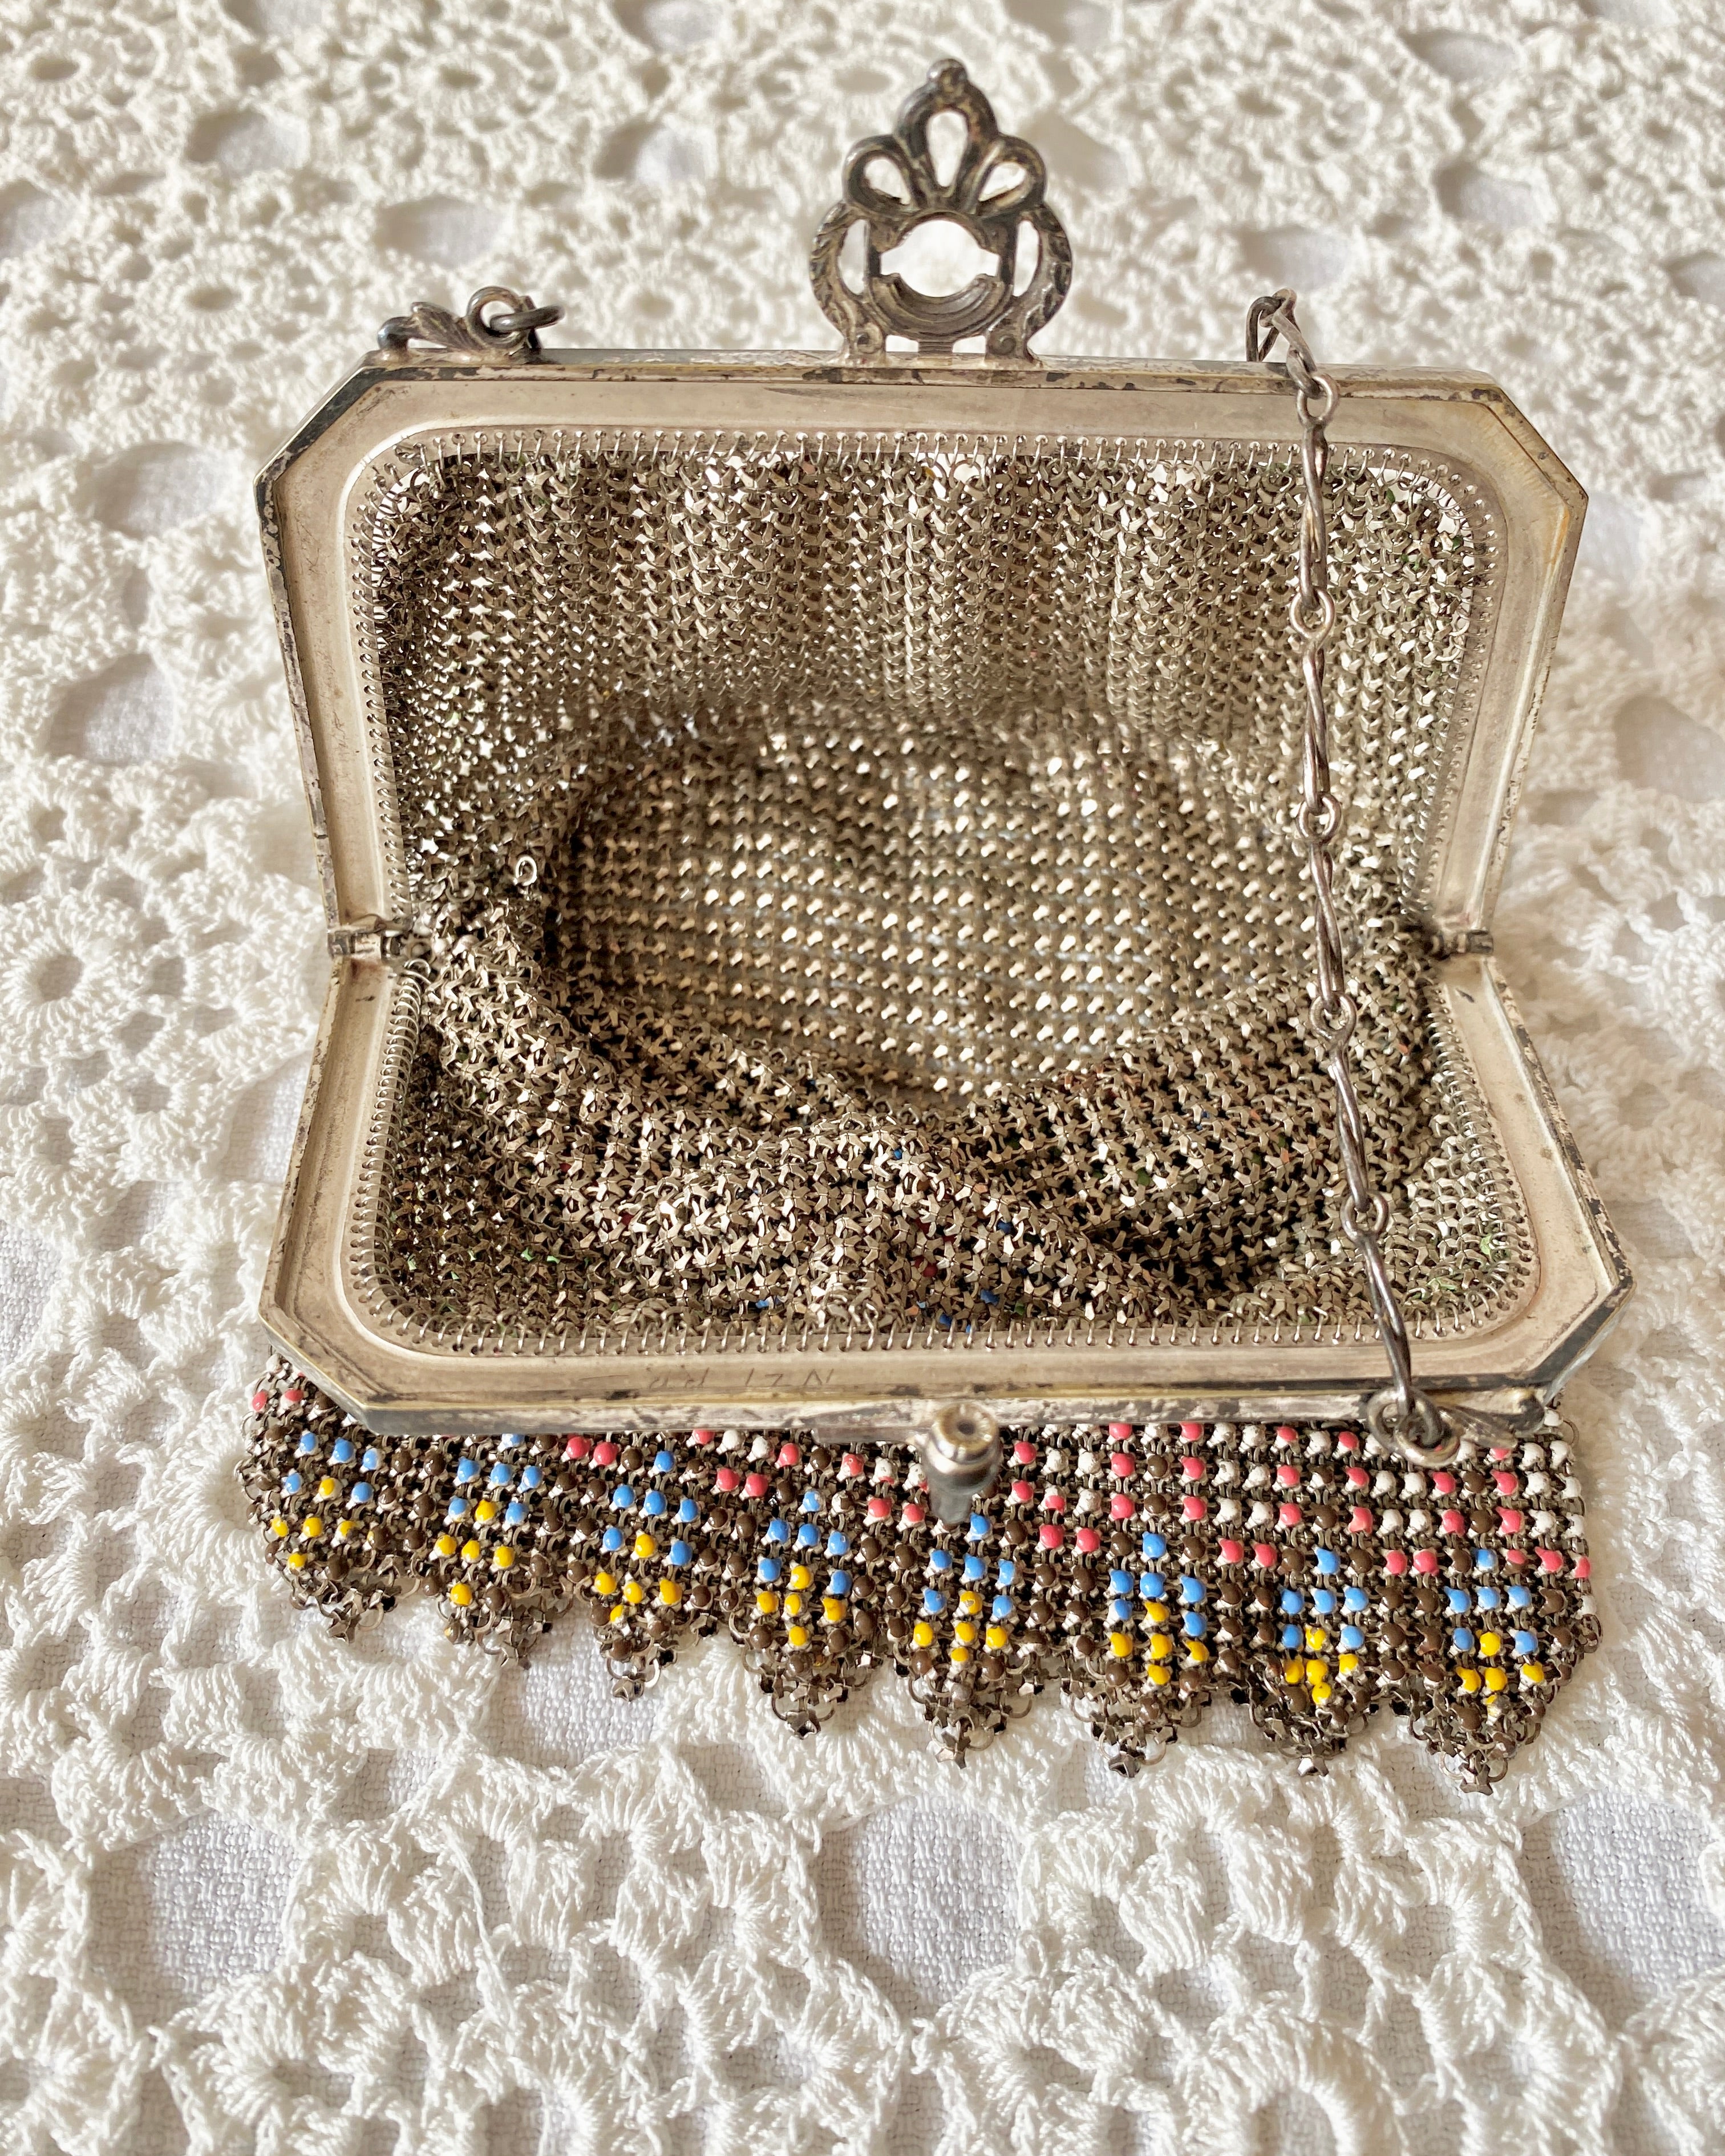 Antique Vintage 1920 Whiting and Davis Art Deco Metal Mesh Bag with Scalloped Edge